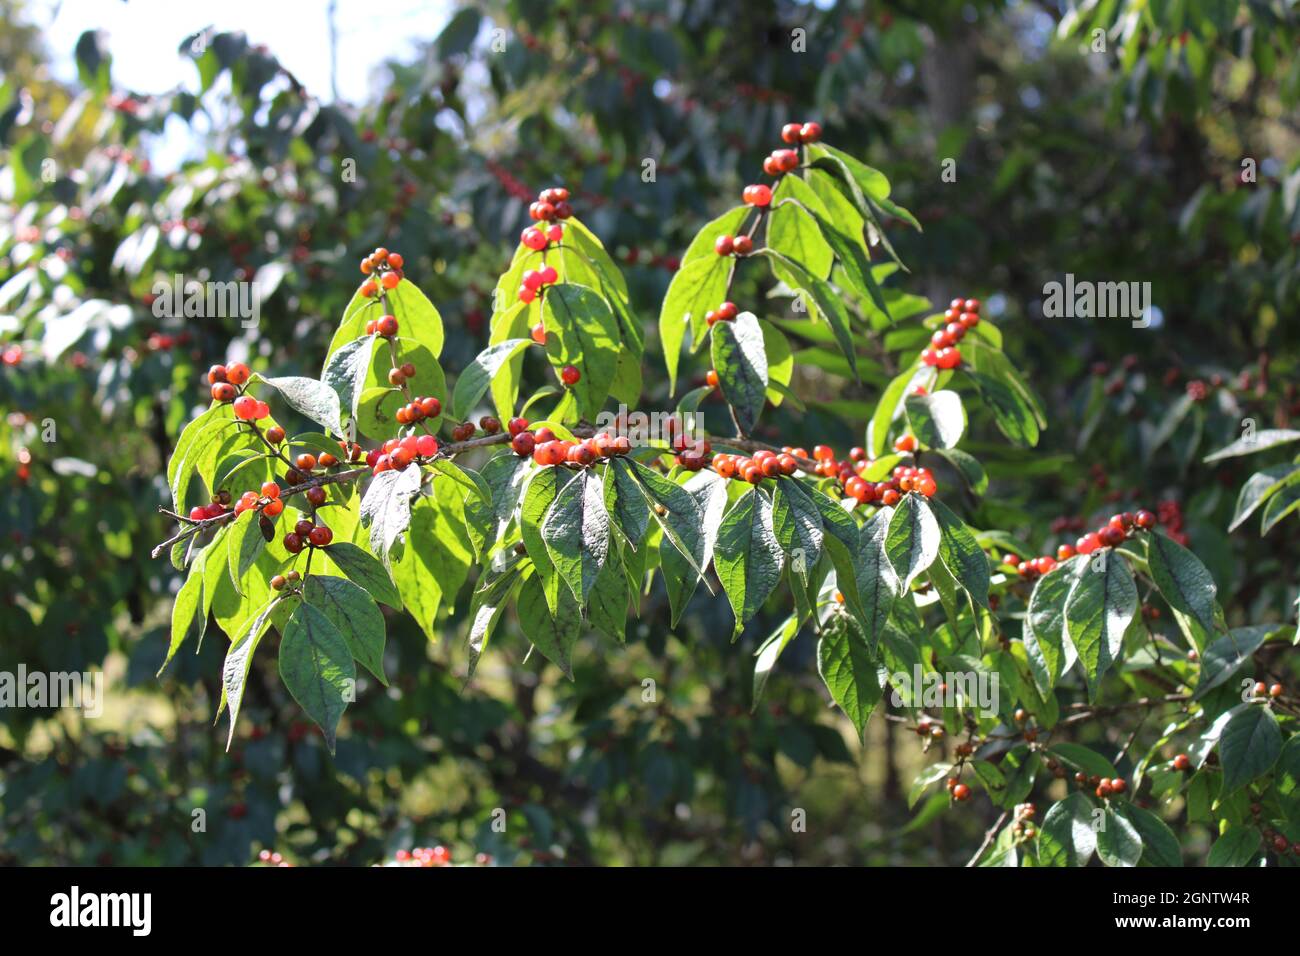 A Bush Honeysuckle Branch with Clusters of Red Berries Stock Photo